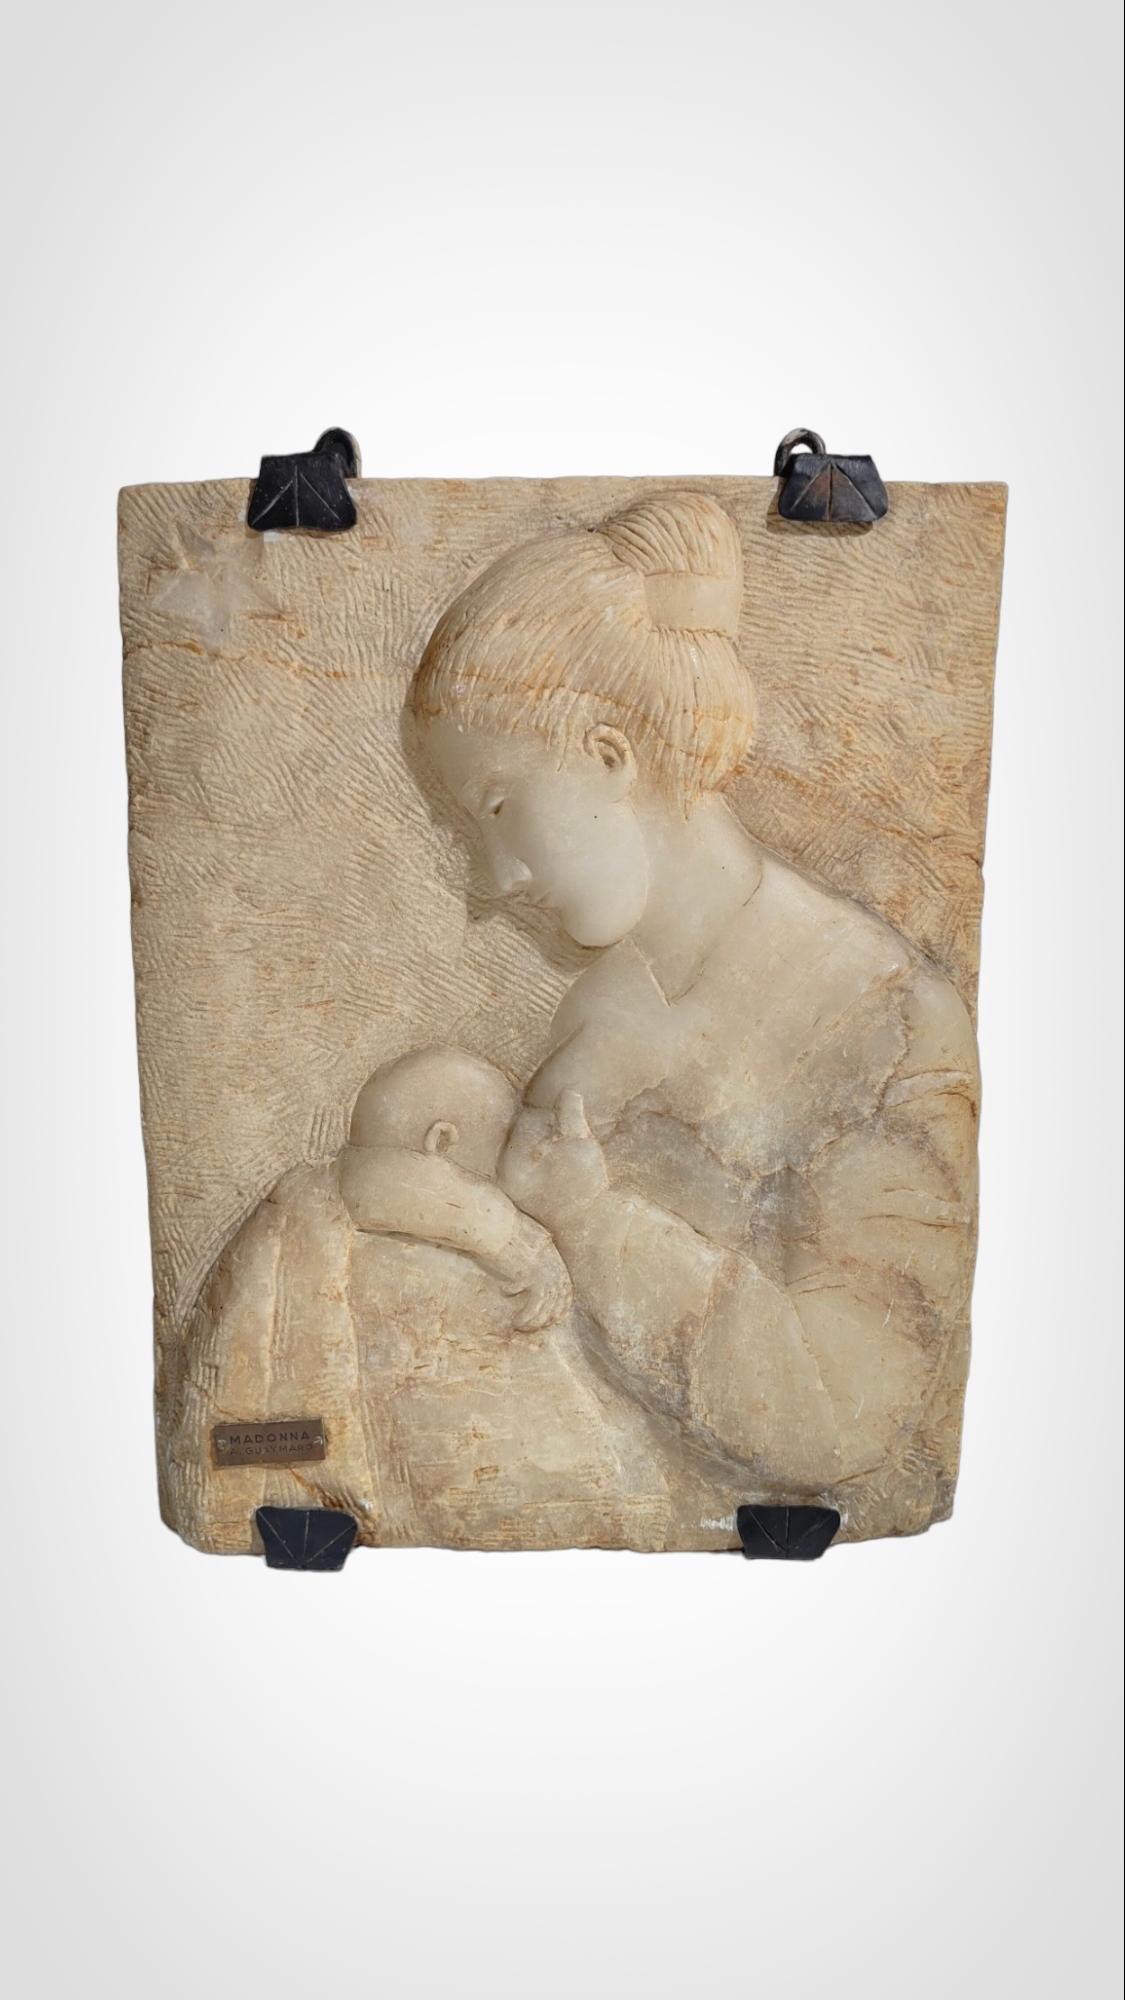 Relief Sculpture By Cuban Artist A.guaymaro
BEAUTIFUL RELIEF CARVED IN ALABASTER BY A CUBAN ARTIST SIGNED IN GUAYMARO-MADONNA.THE ALABASTER MEASURES: 55X40X9 CM.WITH AN IRON SUPPORT TO HANG IT ON THE WALL.